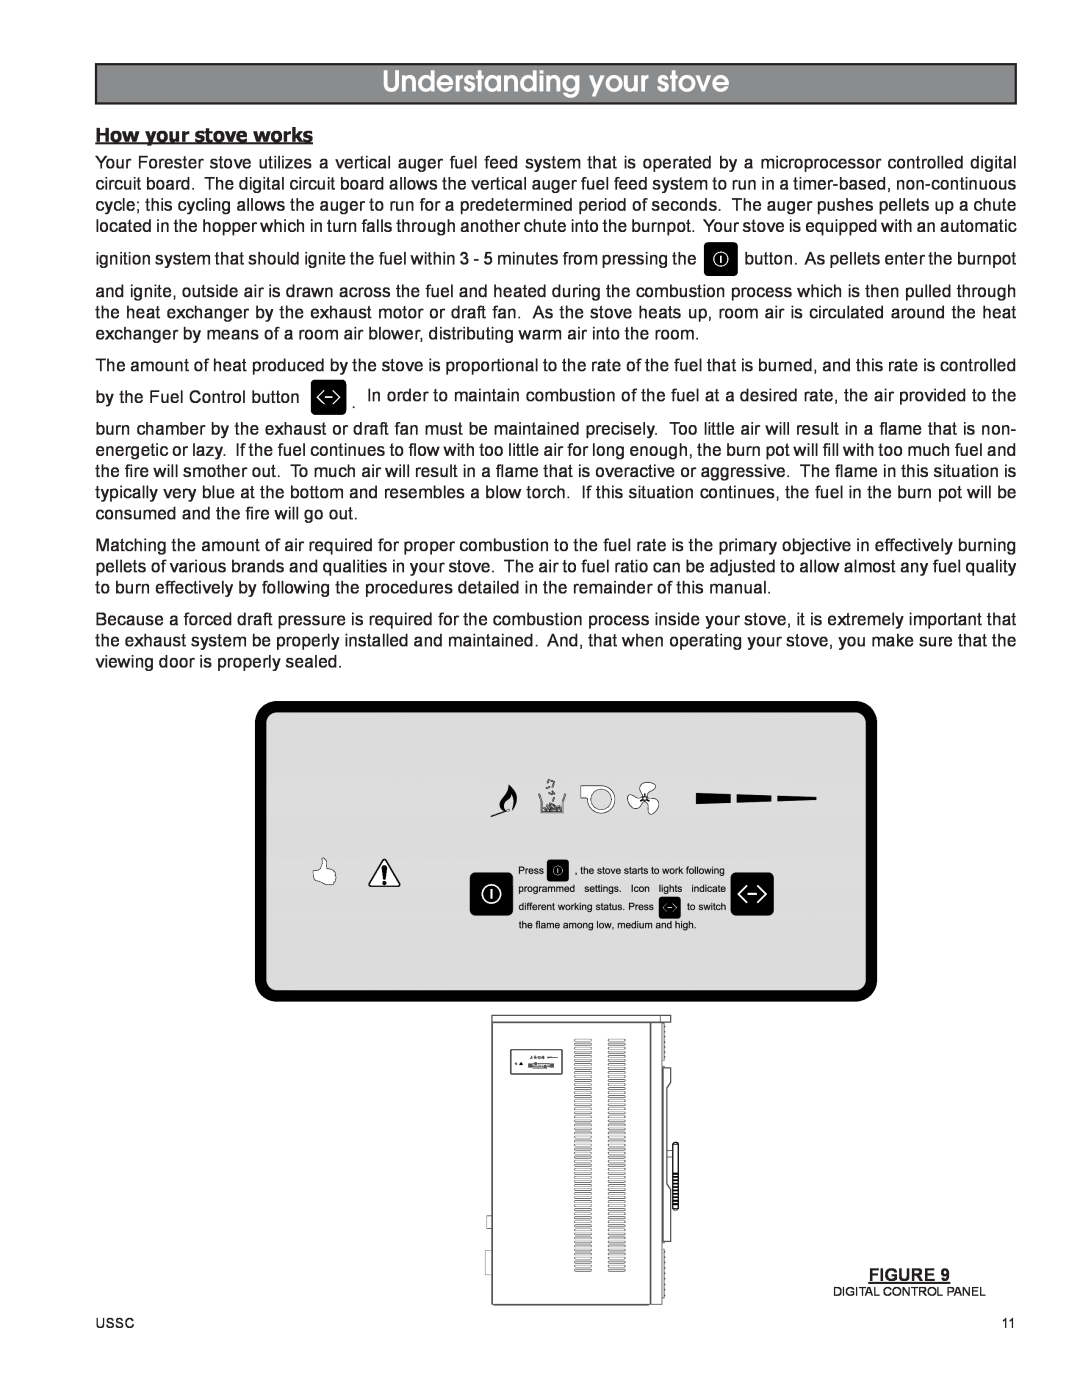 United States Stove 58242 owner manual Understanding your stove, How your stove works 